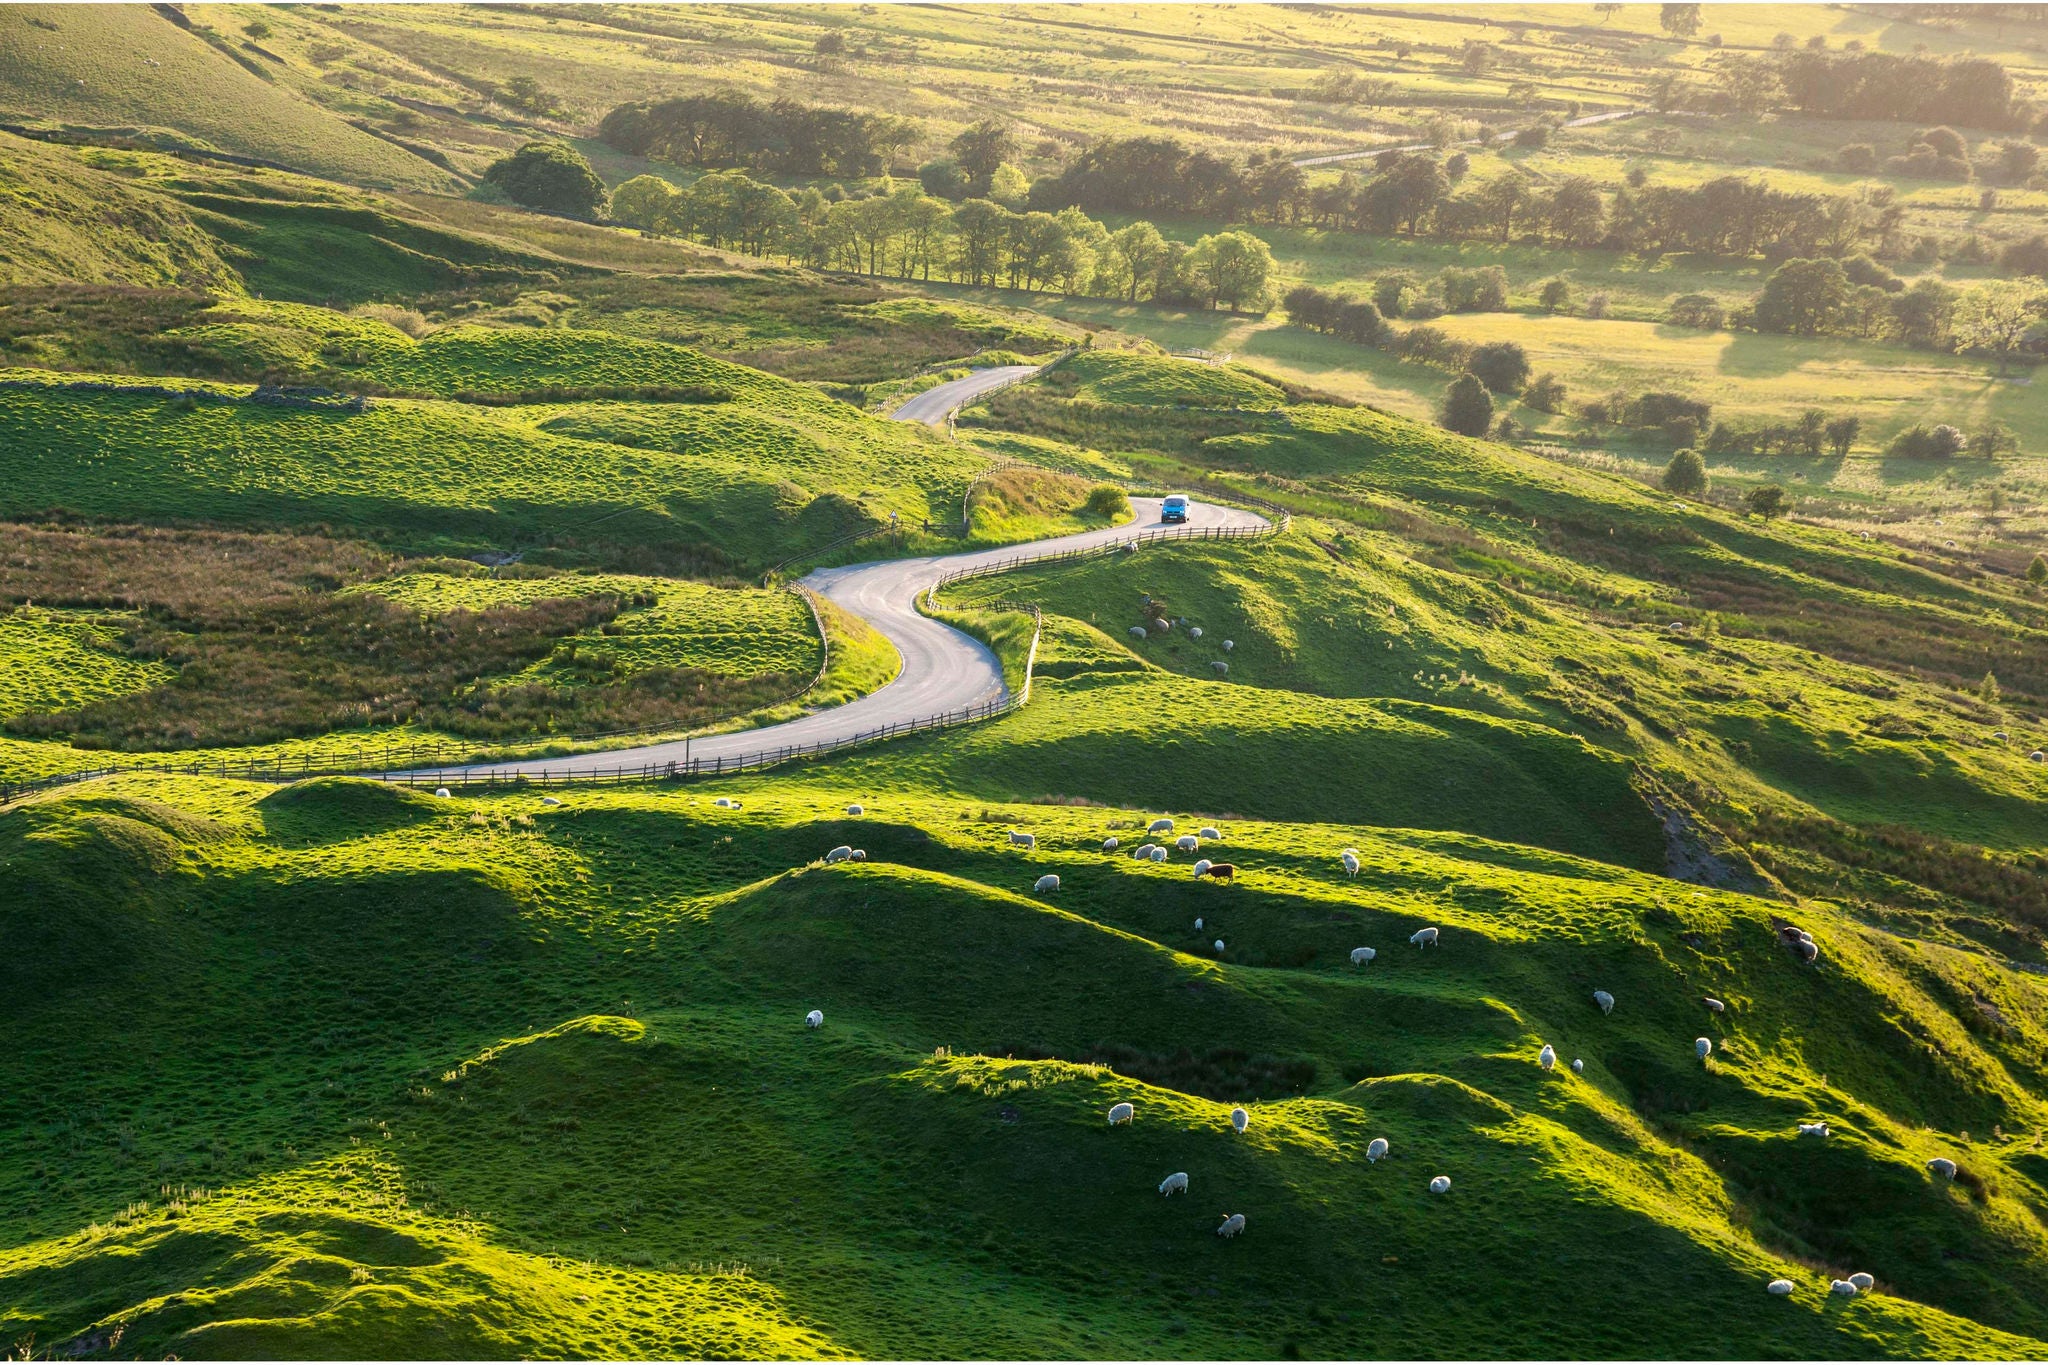 Sheep graze the green, bumpy land beside a bendy road near Edale in the Peak District, Derbyshire. A summer landscape with the warm glow of evening sunlight.